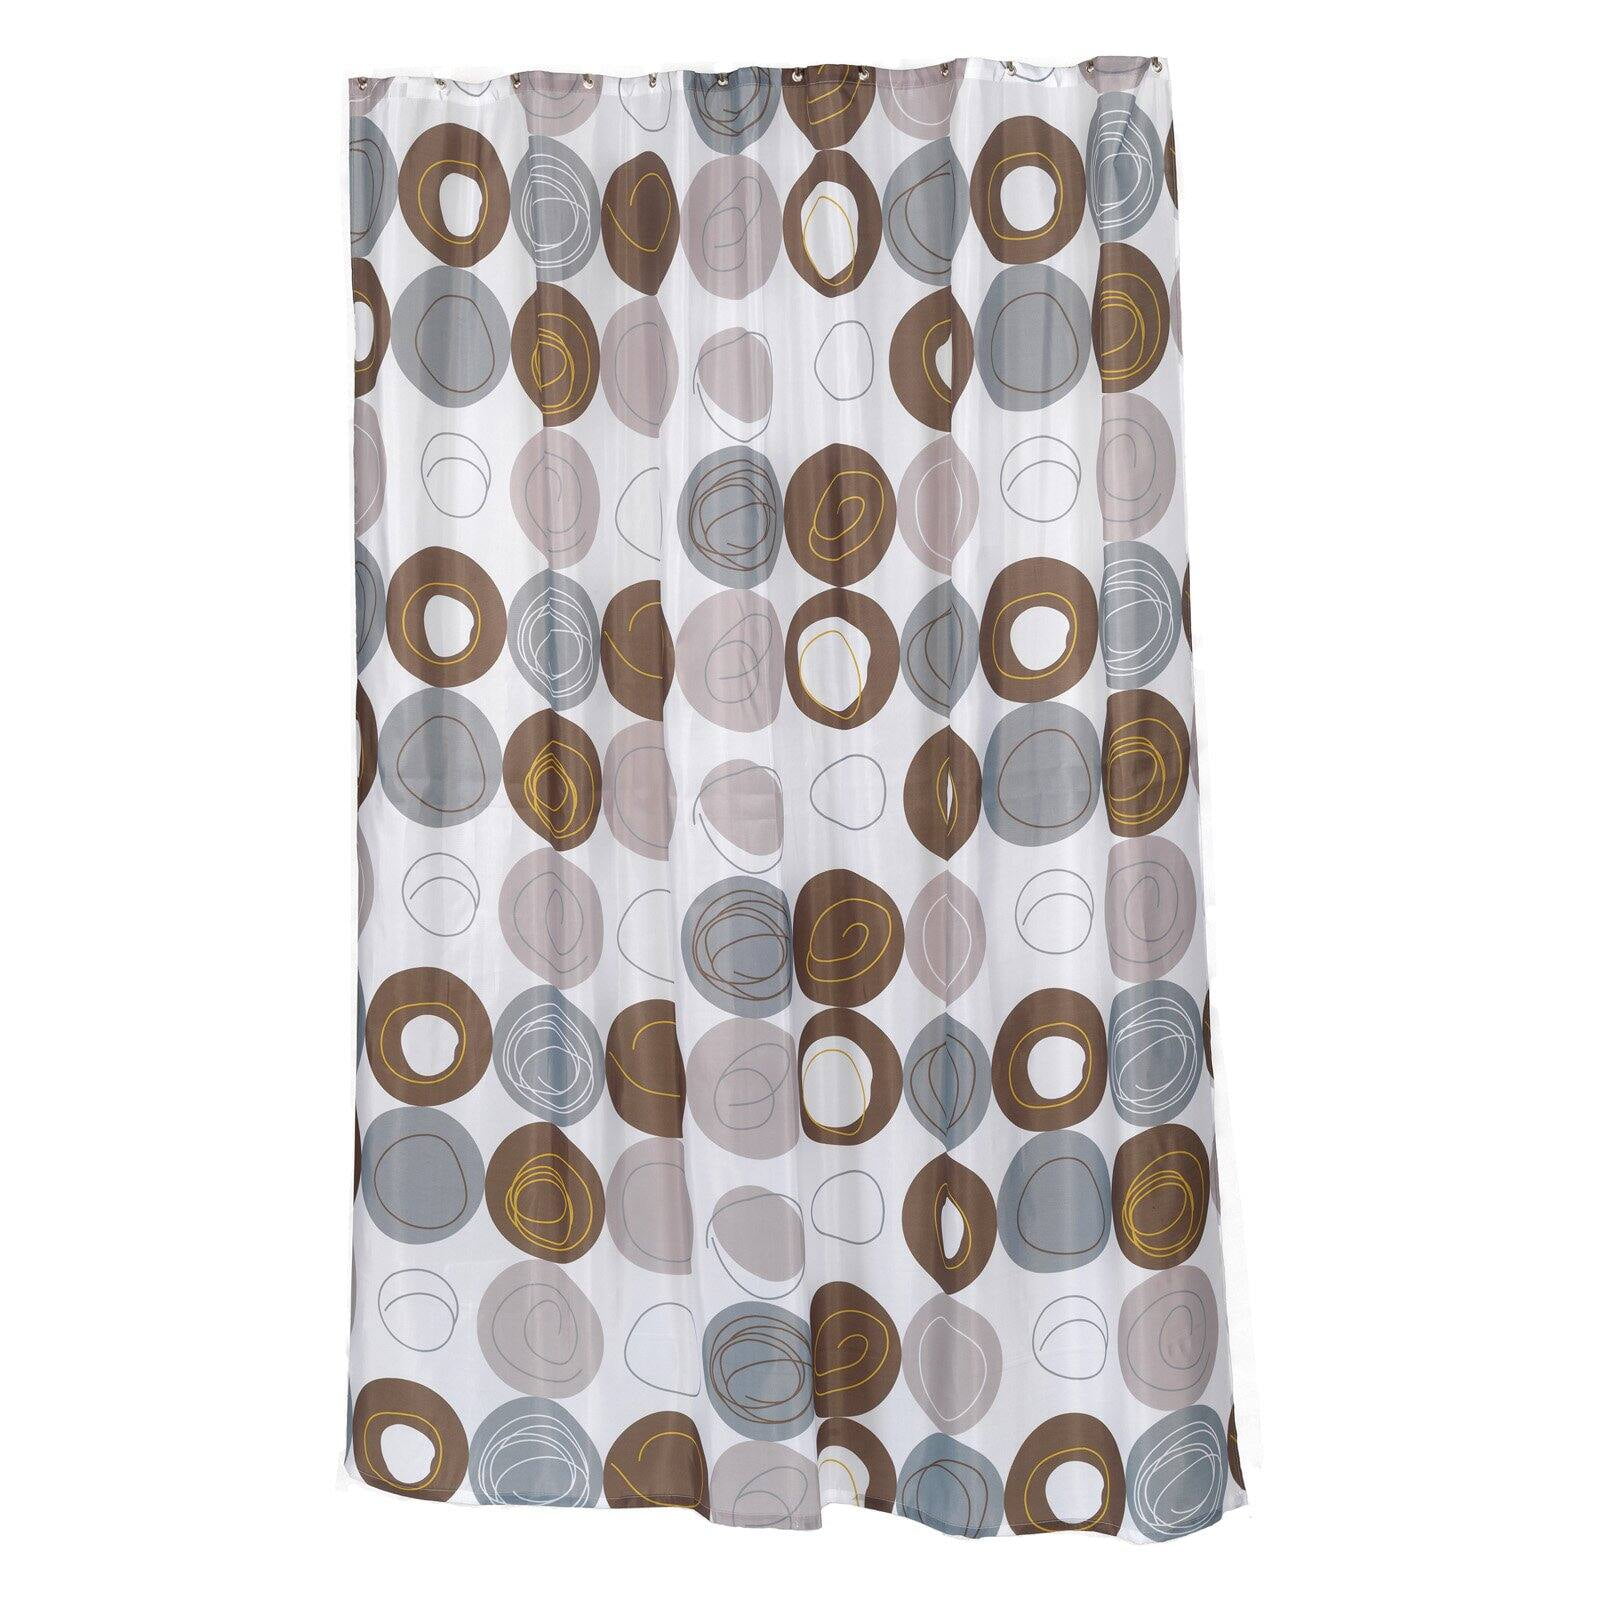 Fabric Shower Curtain Com, What Is The Size Of Shower Curtains